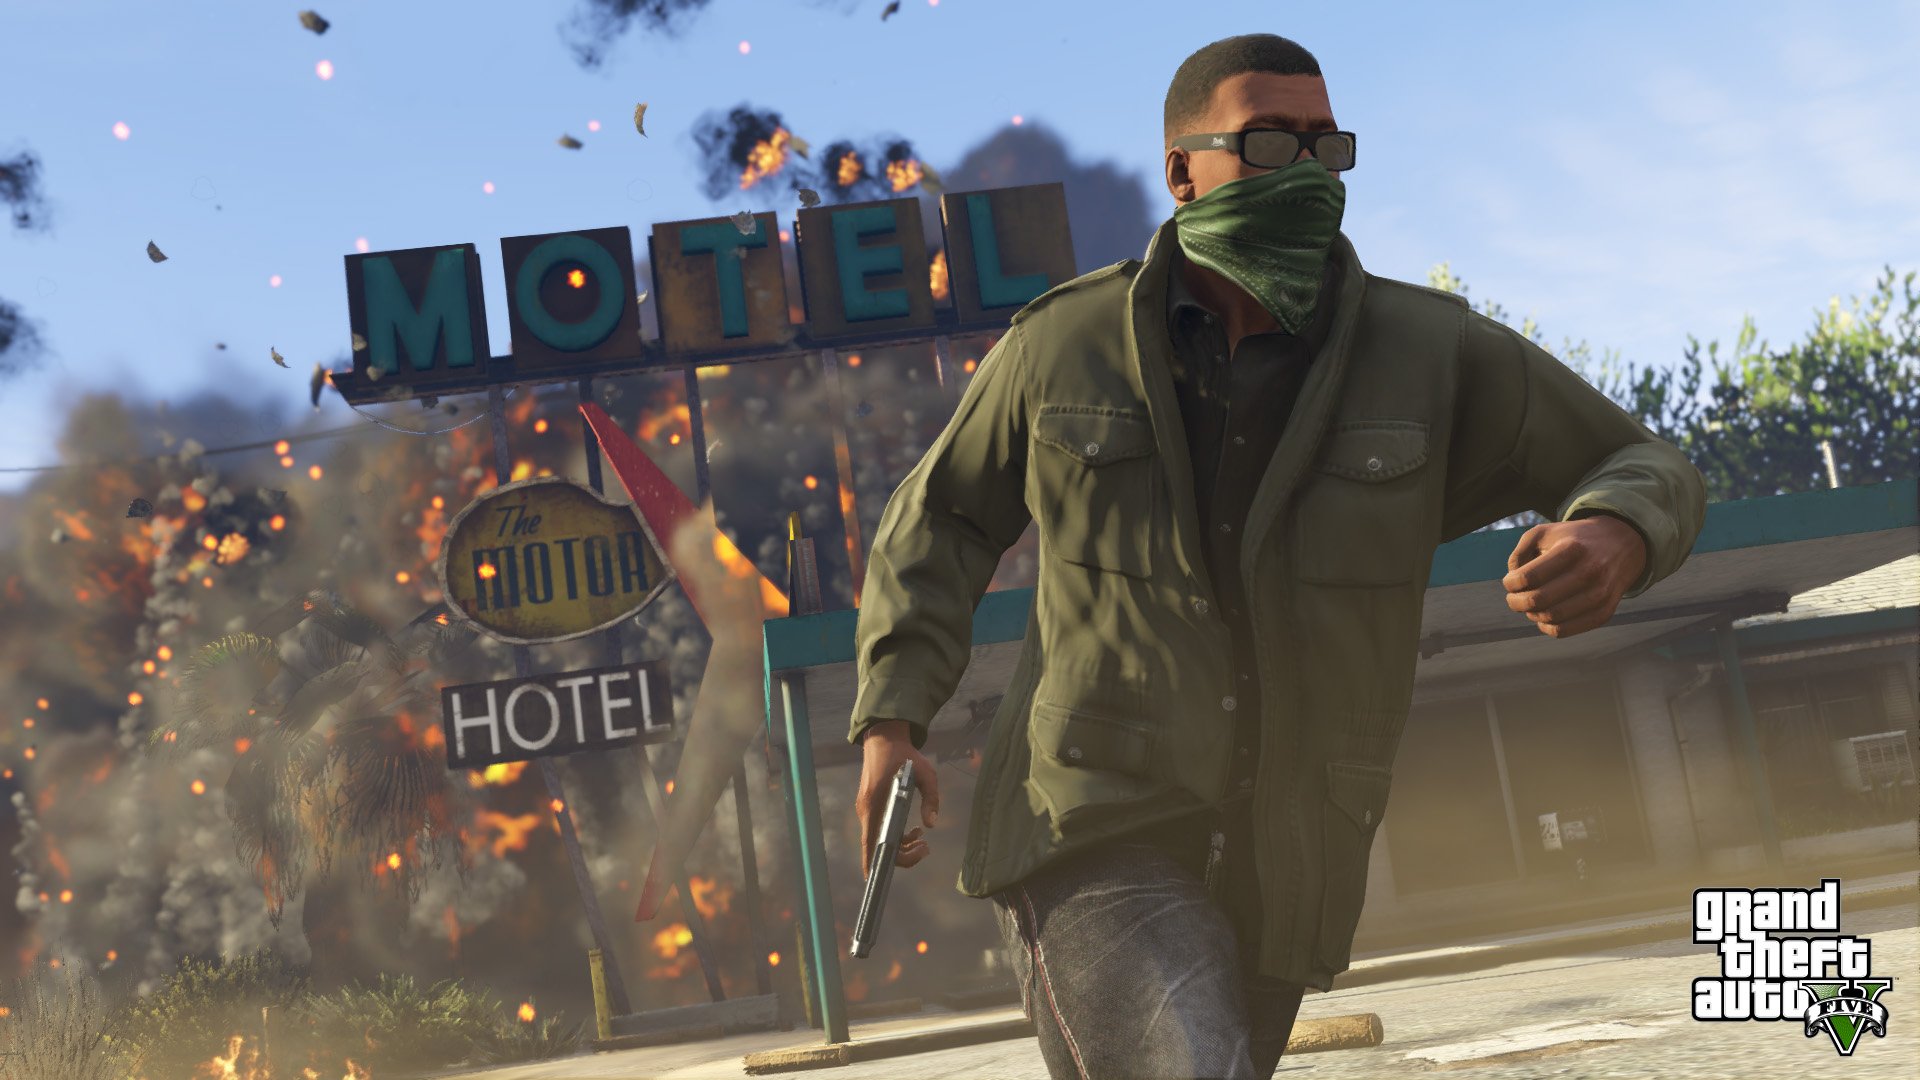 The Xbox One & PS4 GTA 5 release date arrives this week.